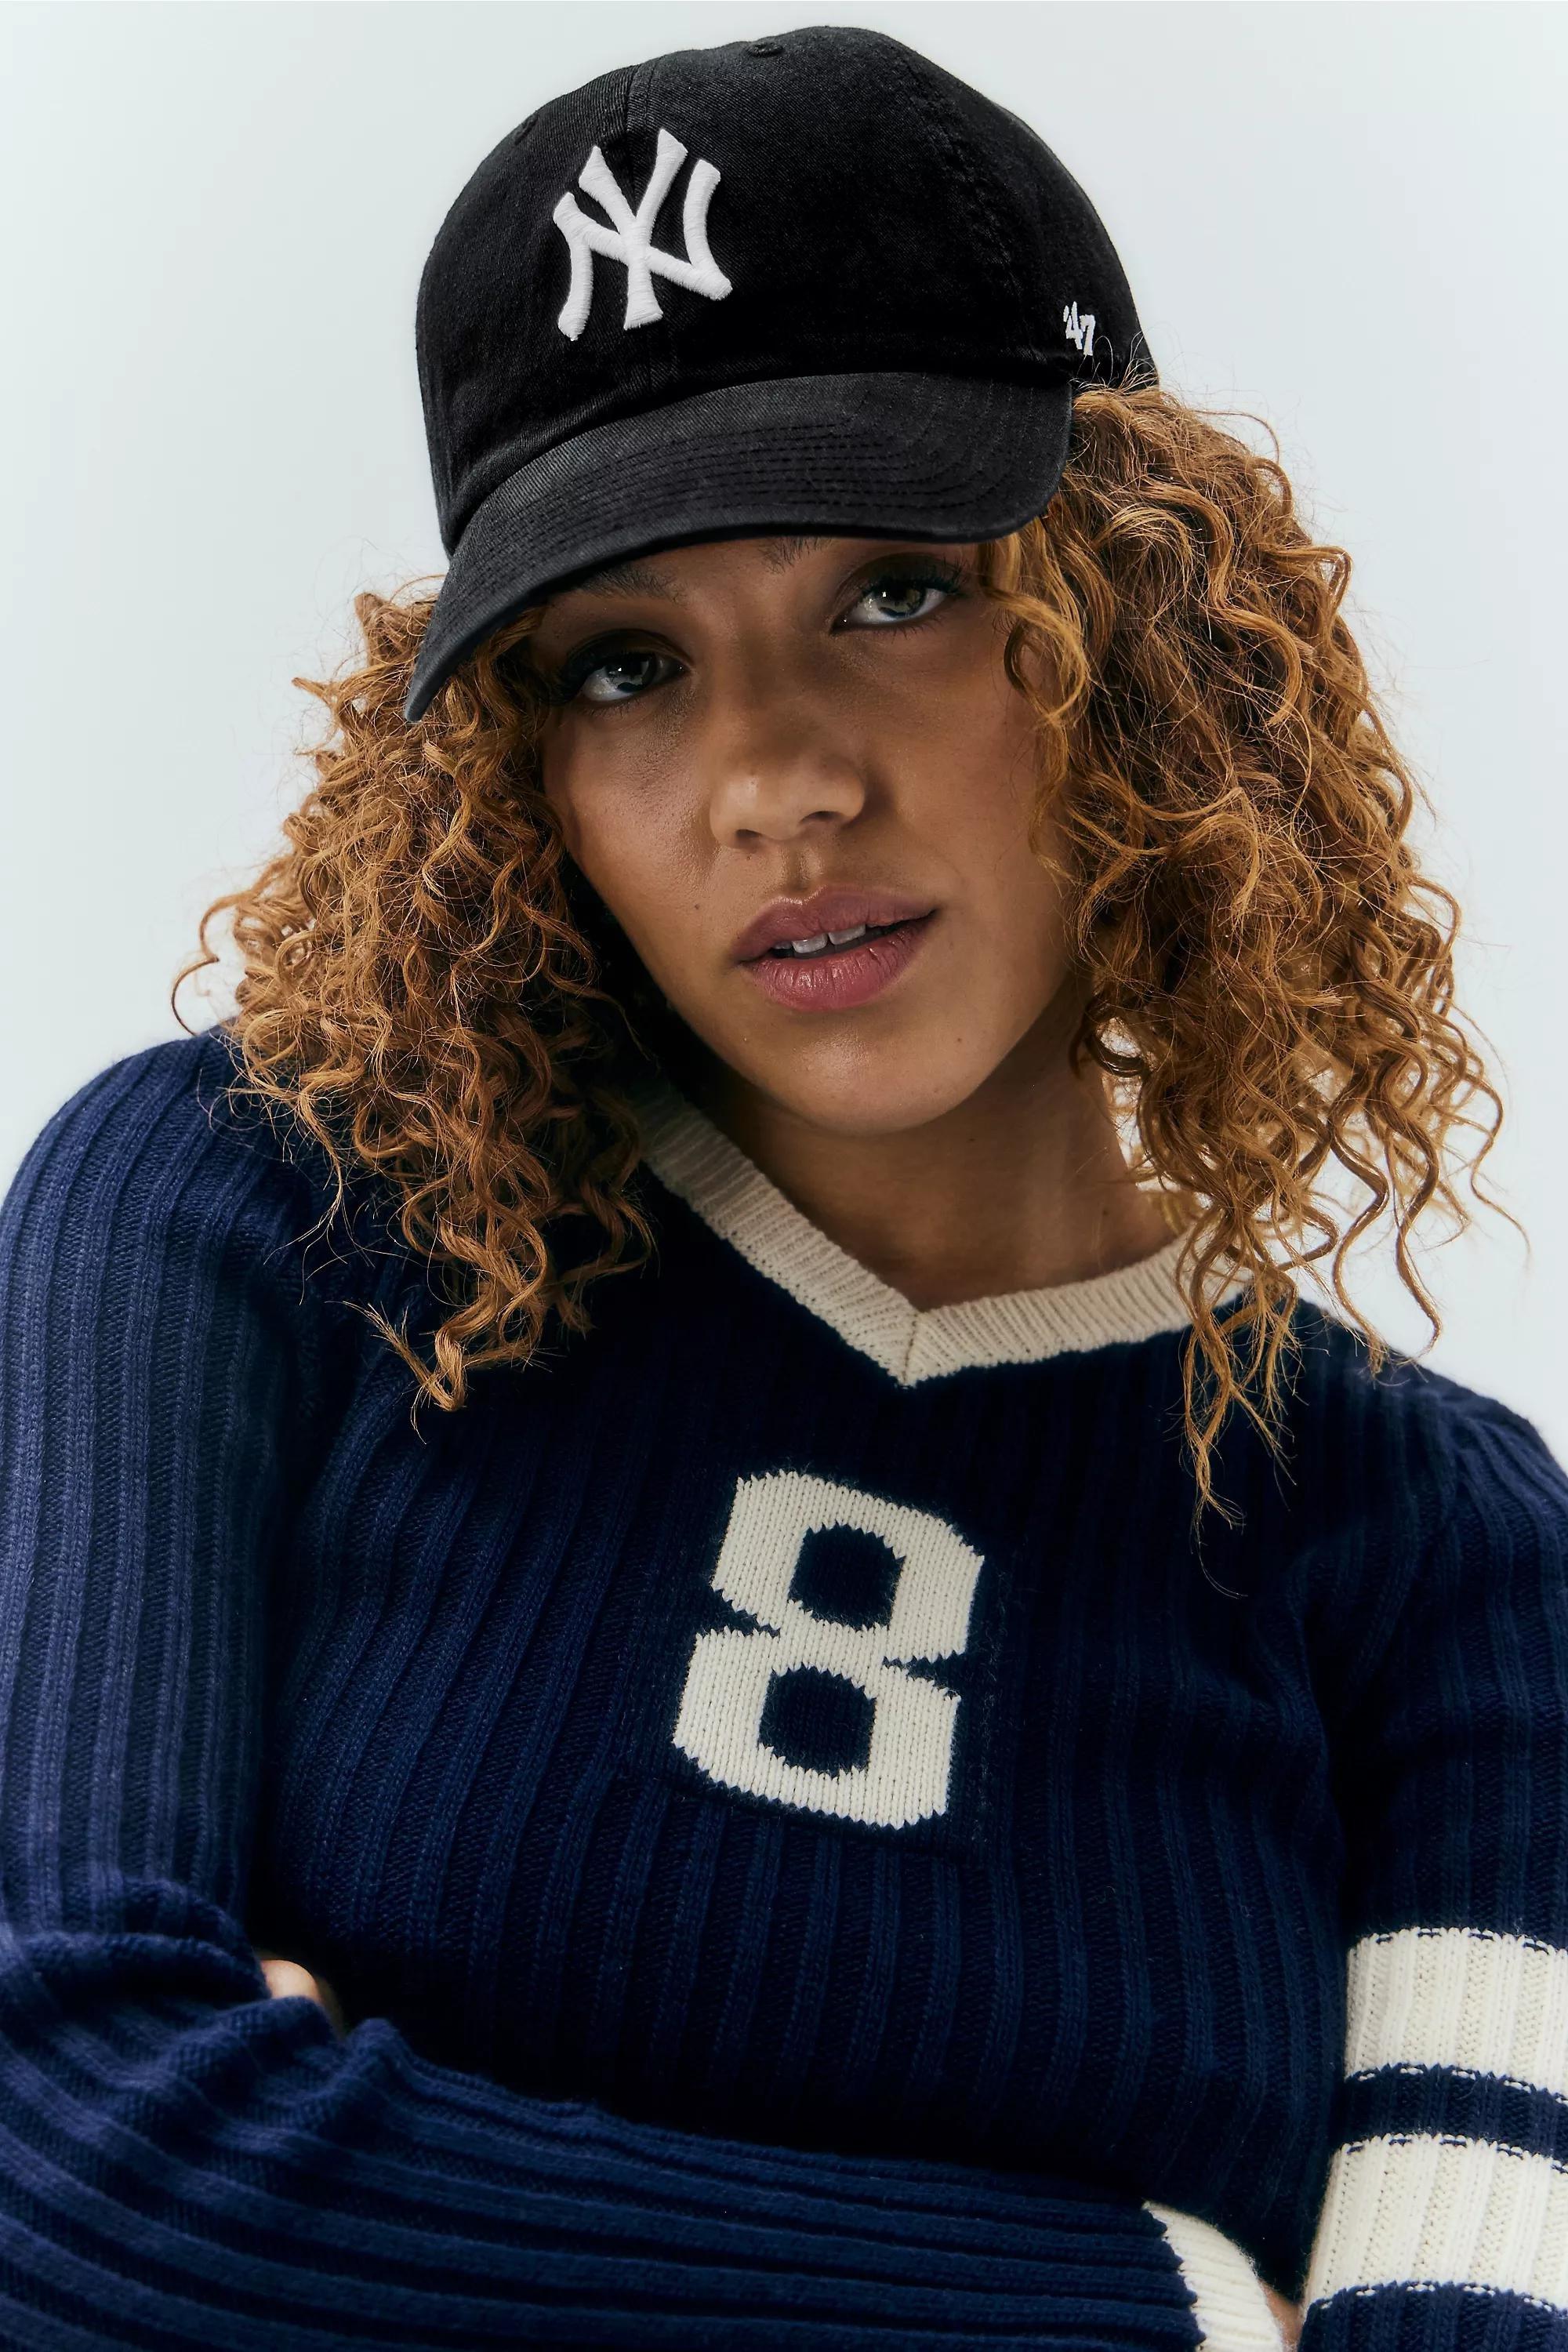 Urban Outfitters - Black Brand Ny Yankees Black Clean Up Cap